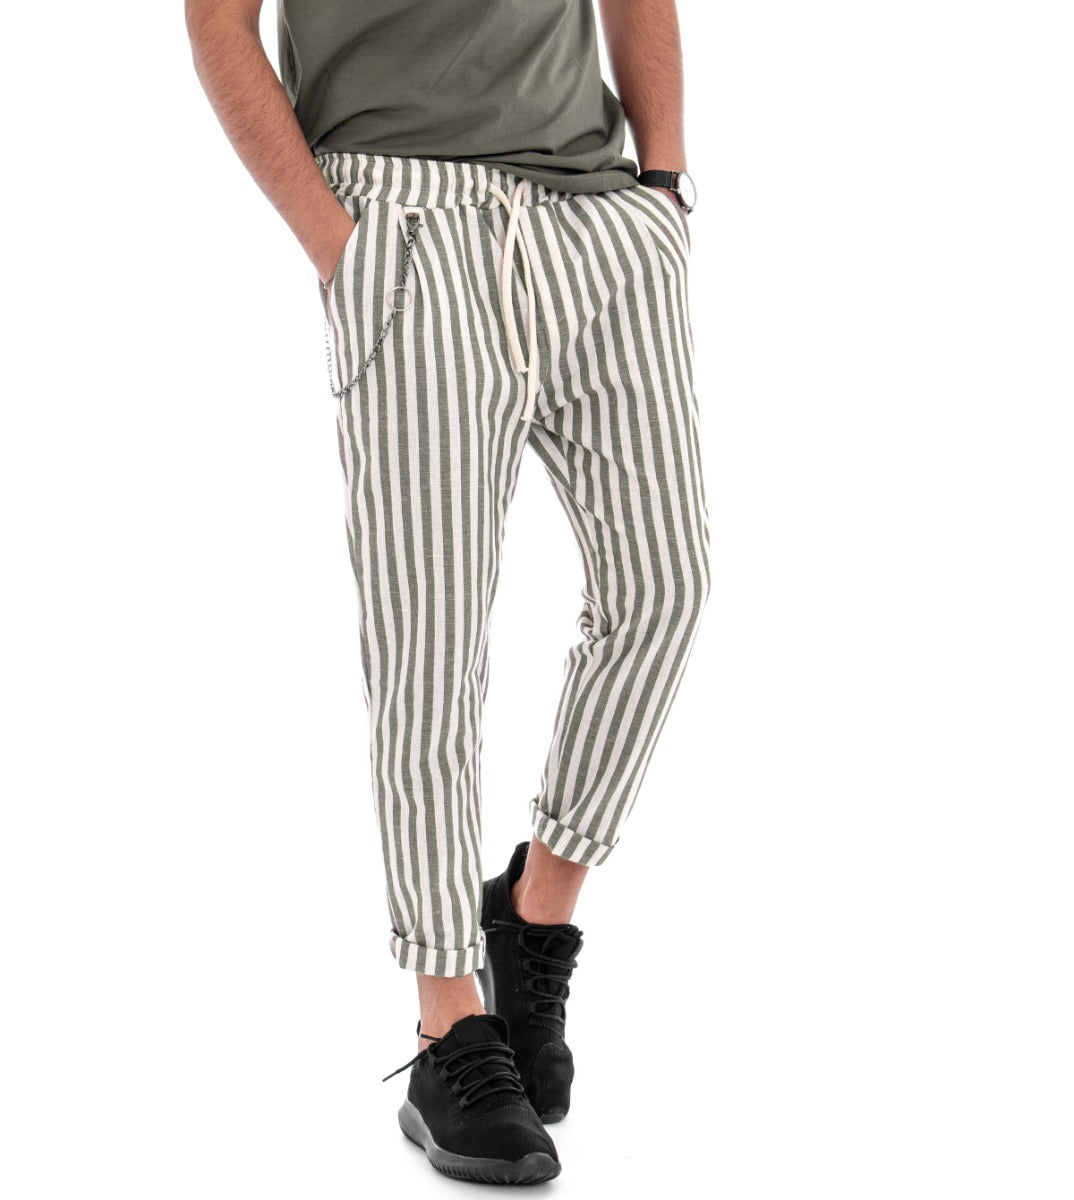 Men's Linen Trousers Striped Elastic Low Crotch Green Casual Tracksuit Trousers GIOSAL